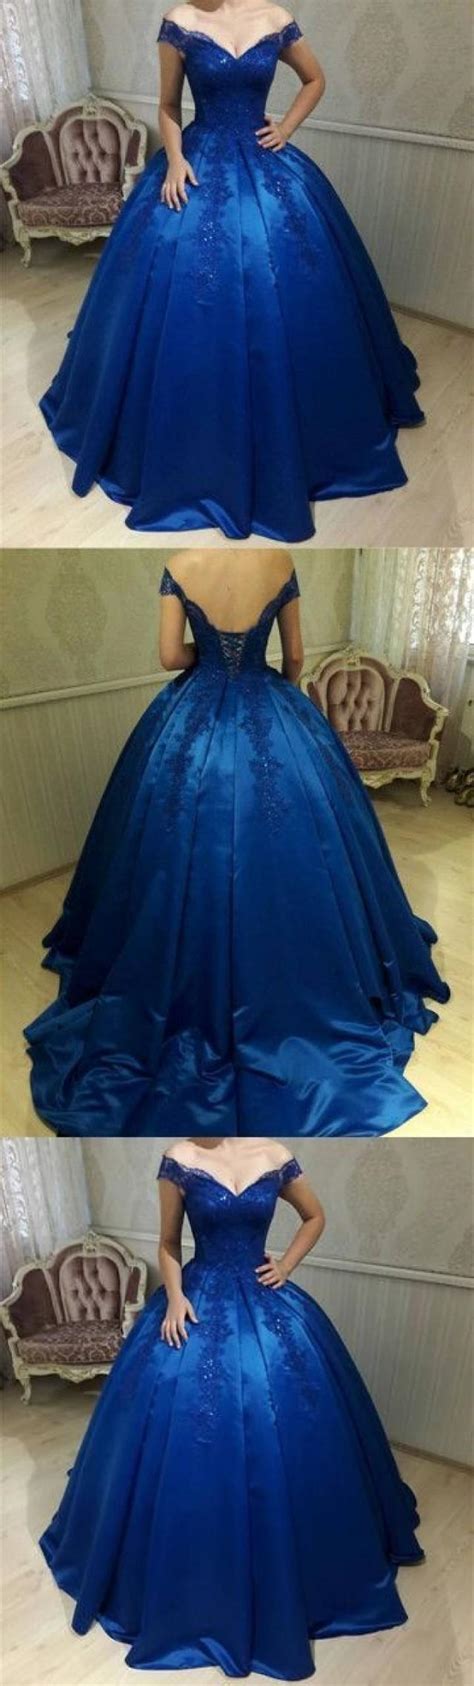 New Fashions Ball Gown Lace Prom Dresses Formal Dress Satin Prom Dresses Sexy Royal Blue Evening